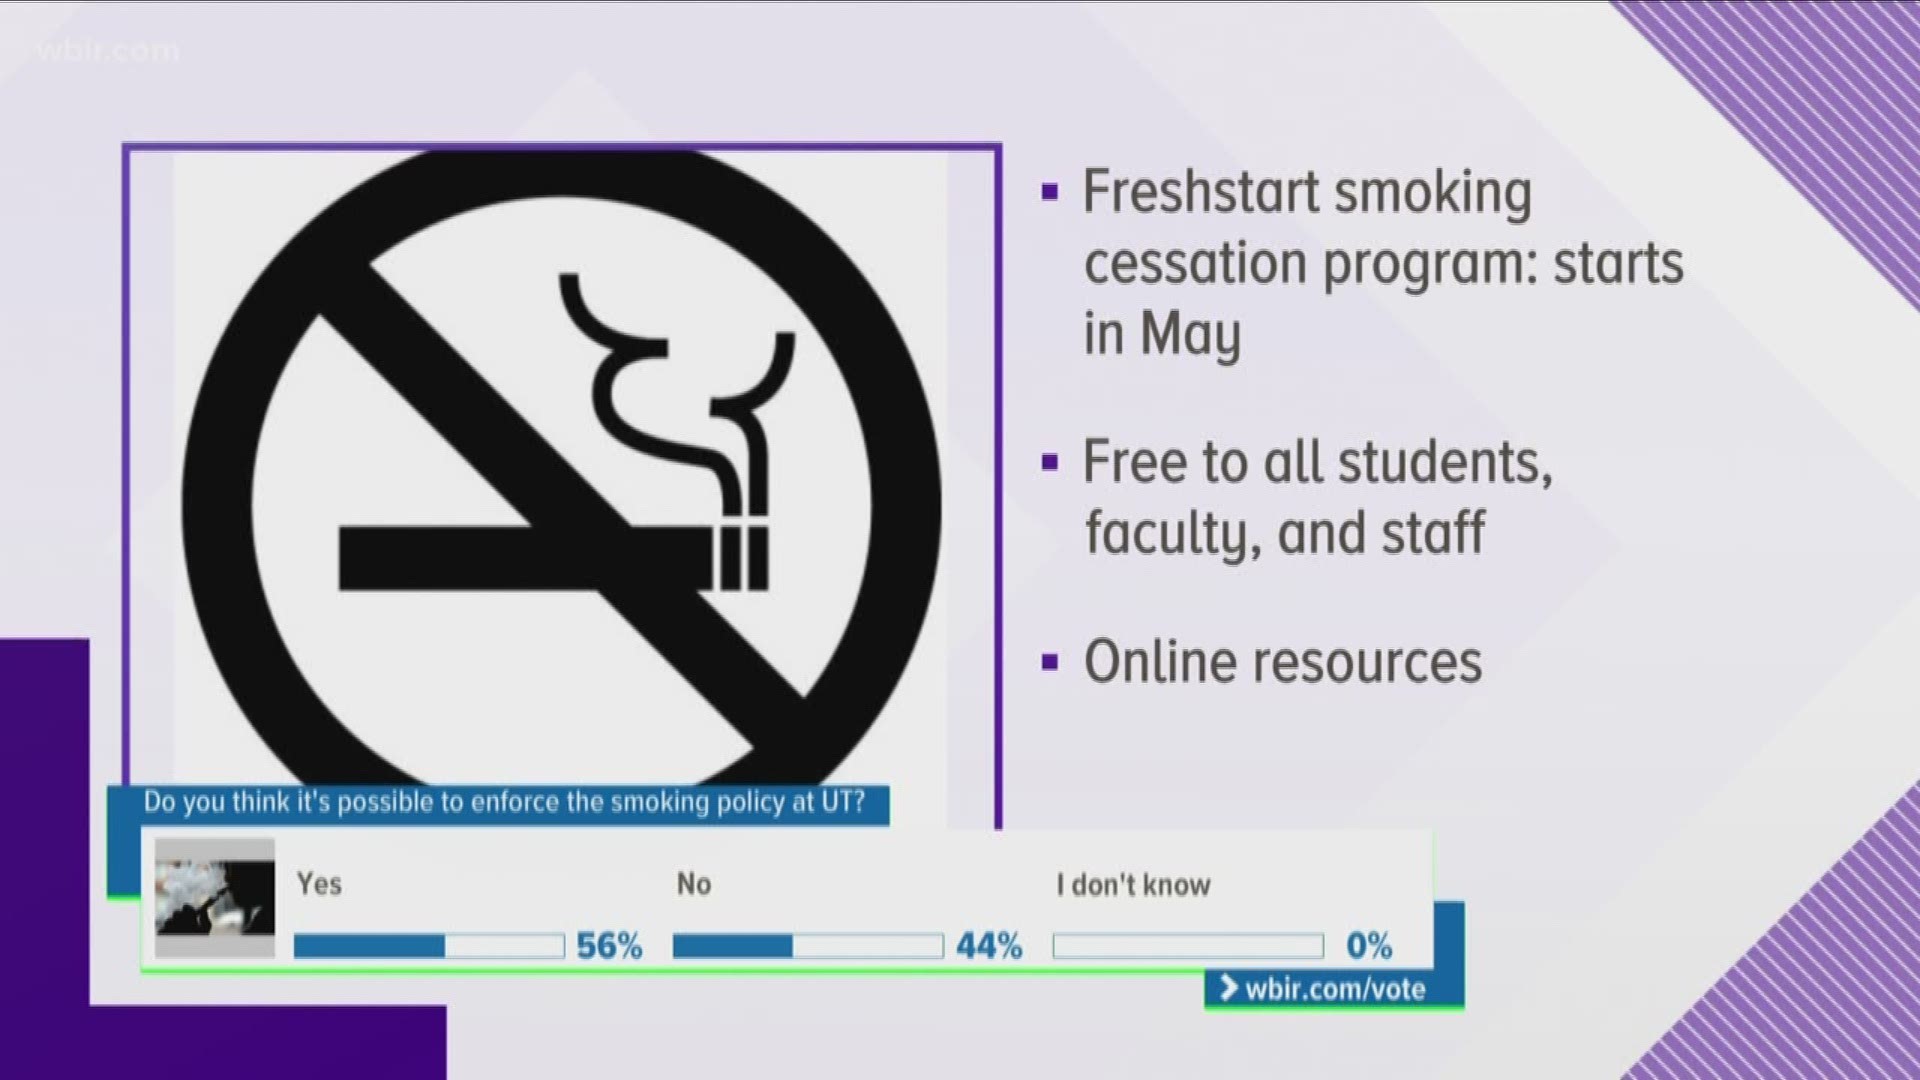 The University of Tennessee plans to be a smoke-free campus. Many folks have asked if not smoking on campus can be enforced.